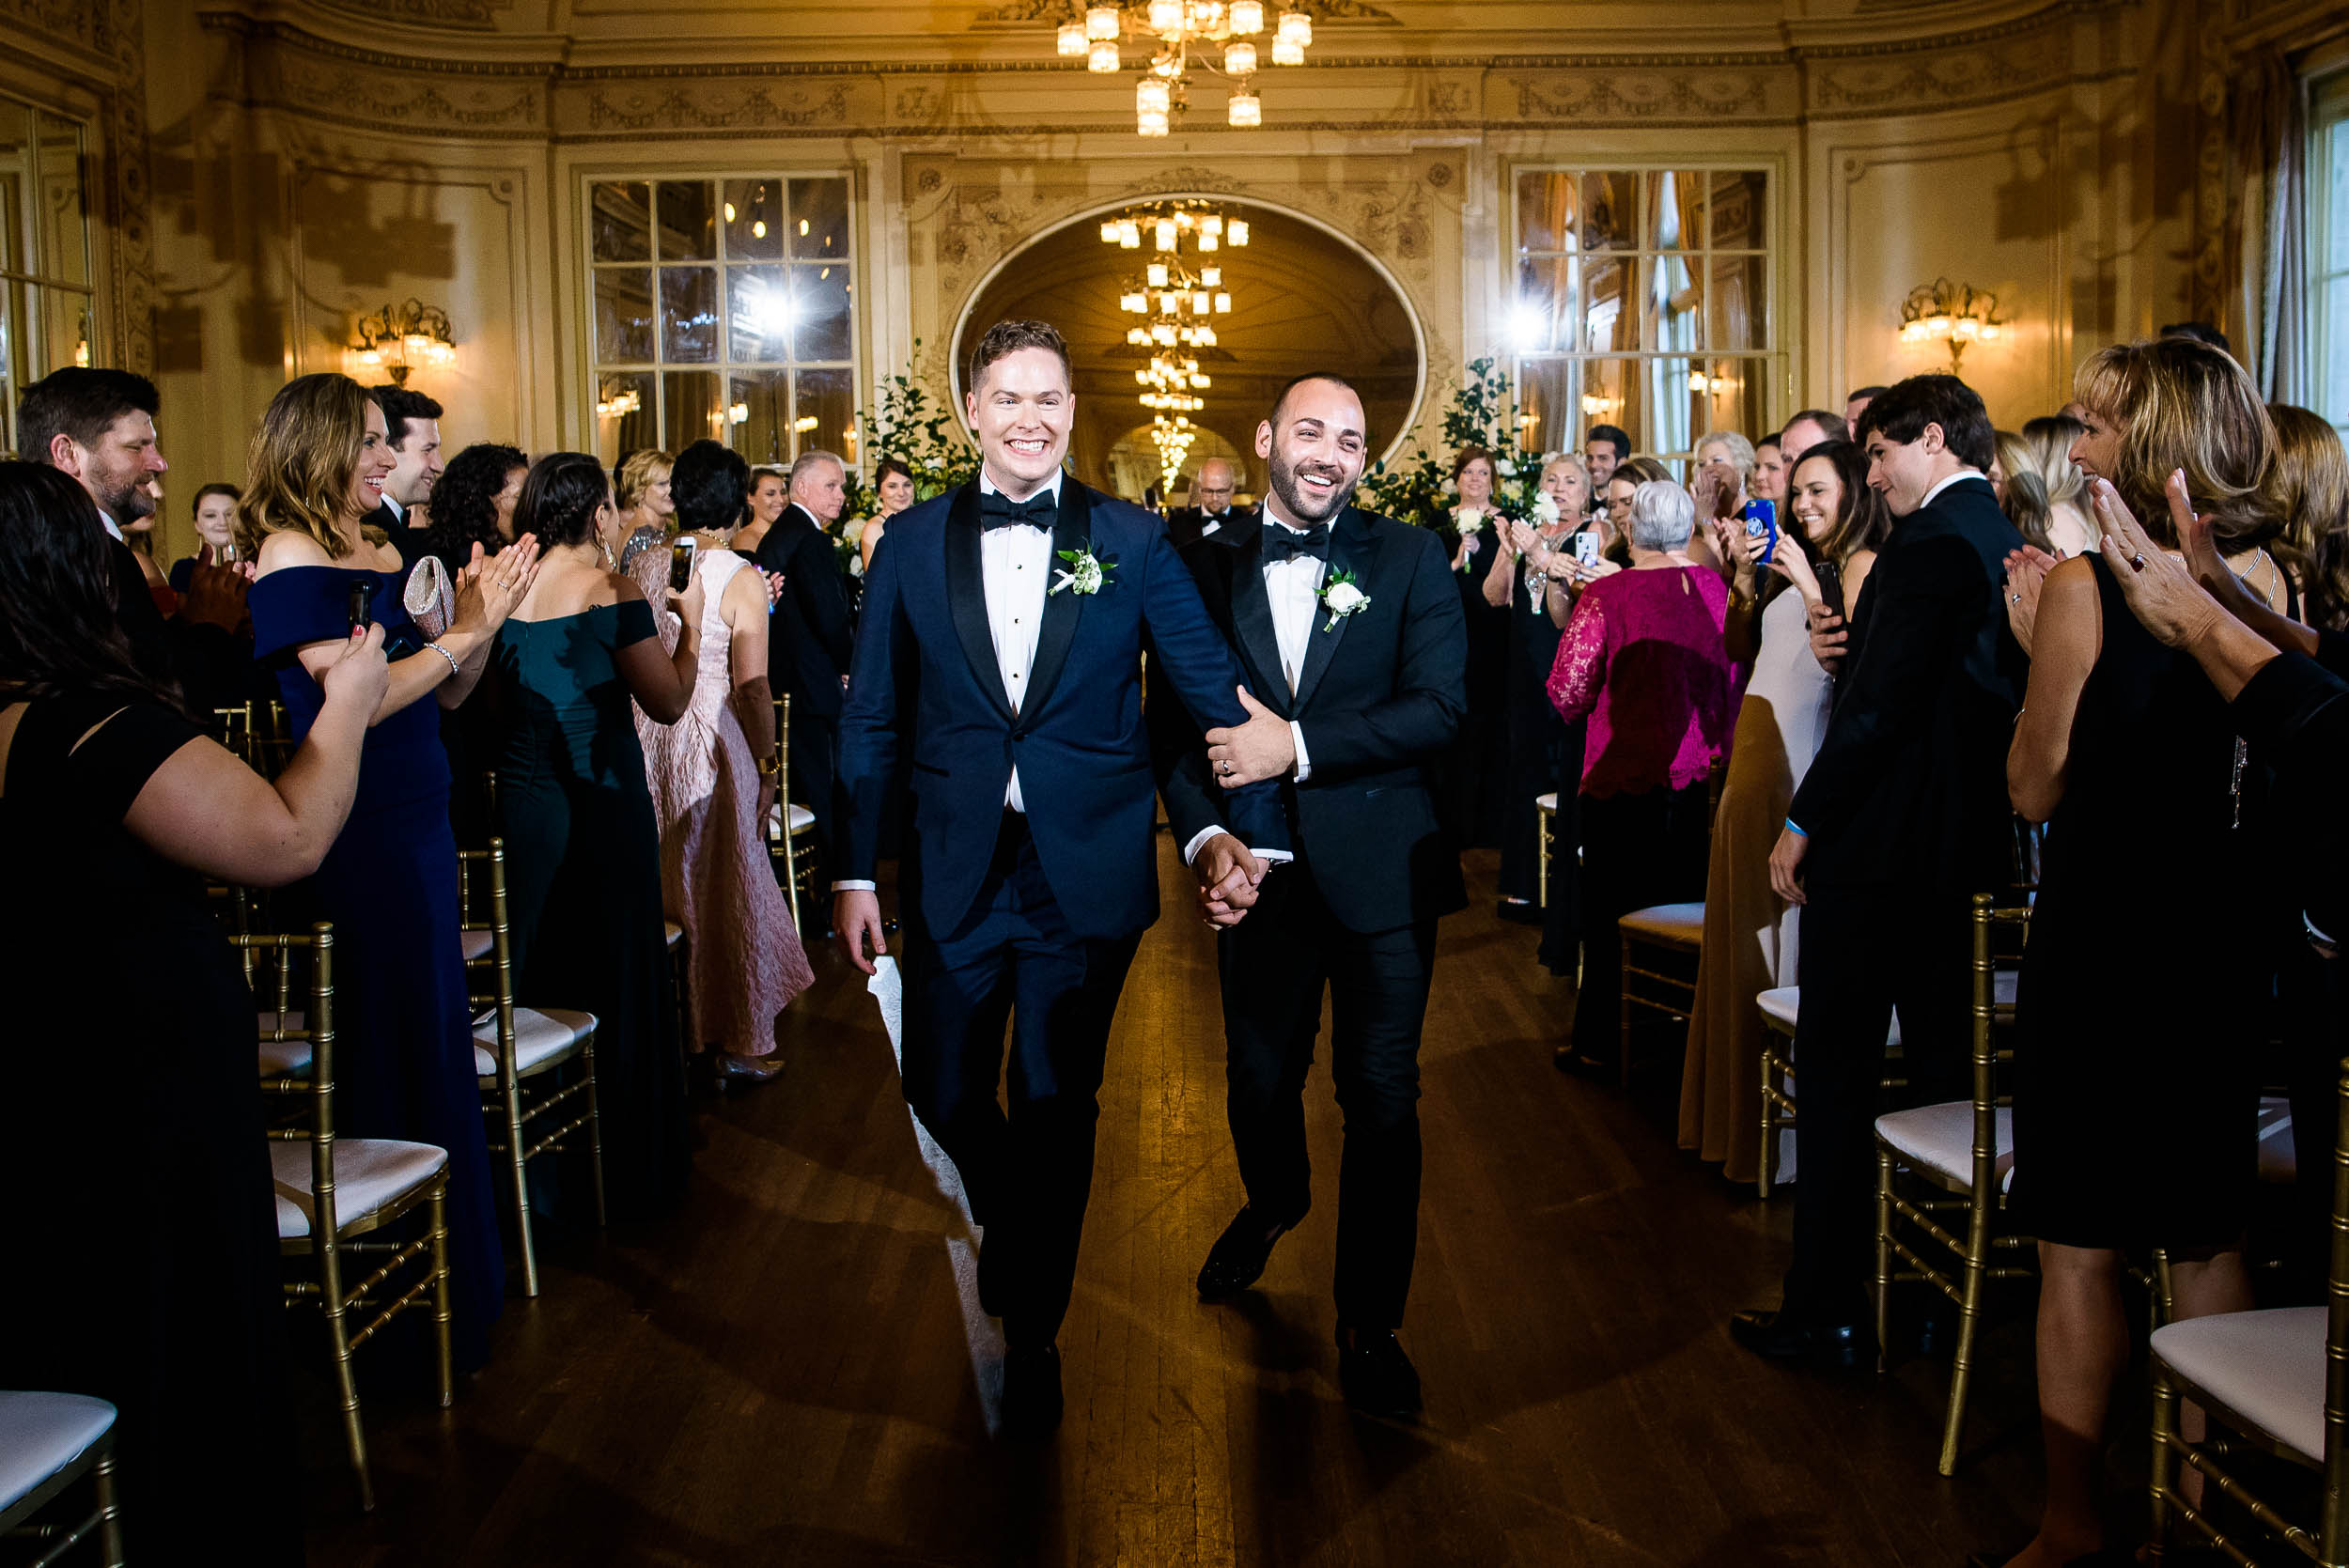 Grooms exiting wedding ceremony for luxurious fall wedding at the Chicago Symphony Center captured by J. Brown Photography. See more wedding ideas at jbrownphotography.com!